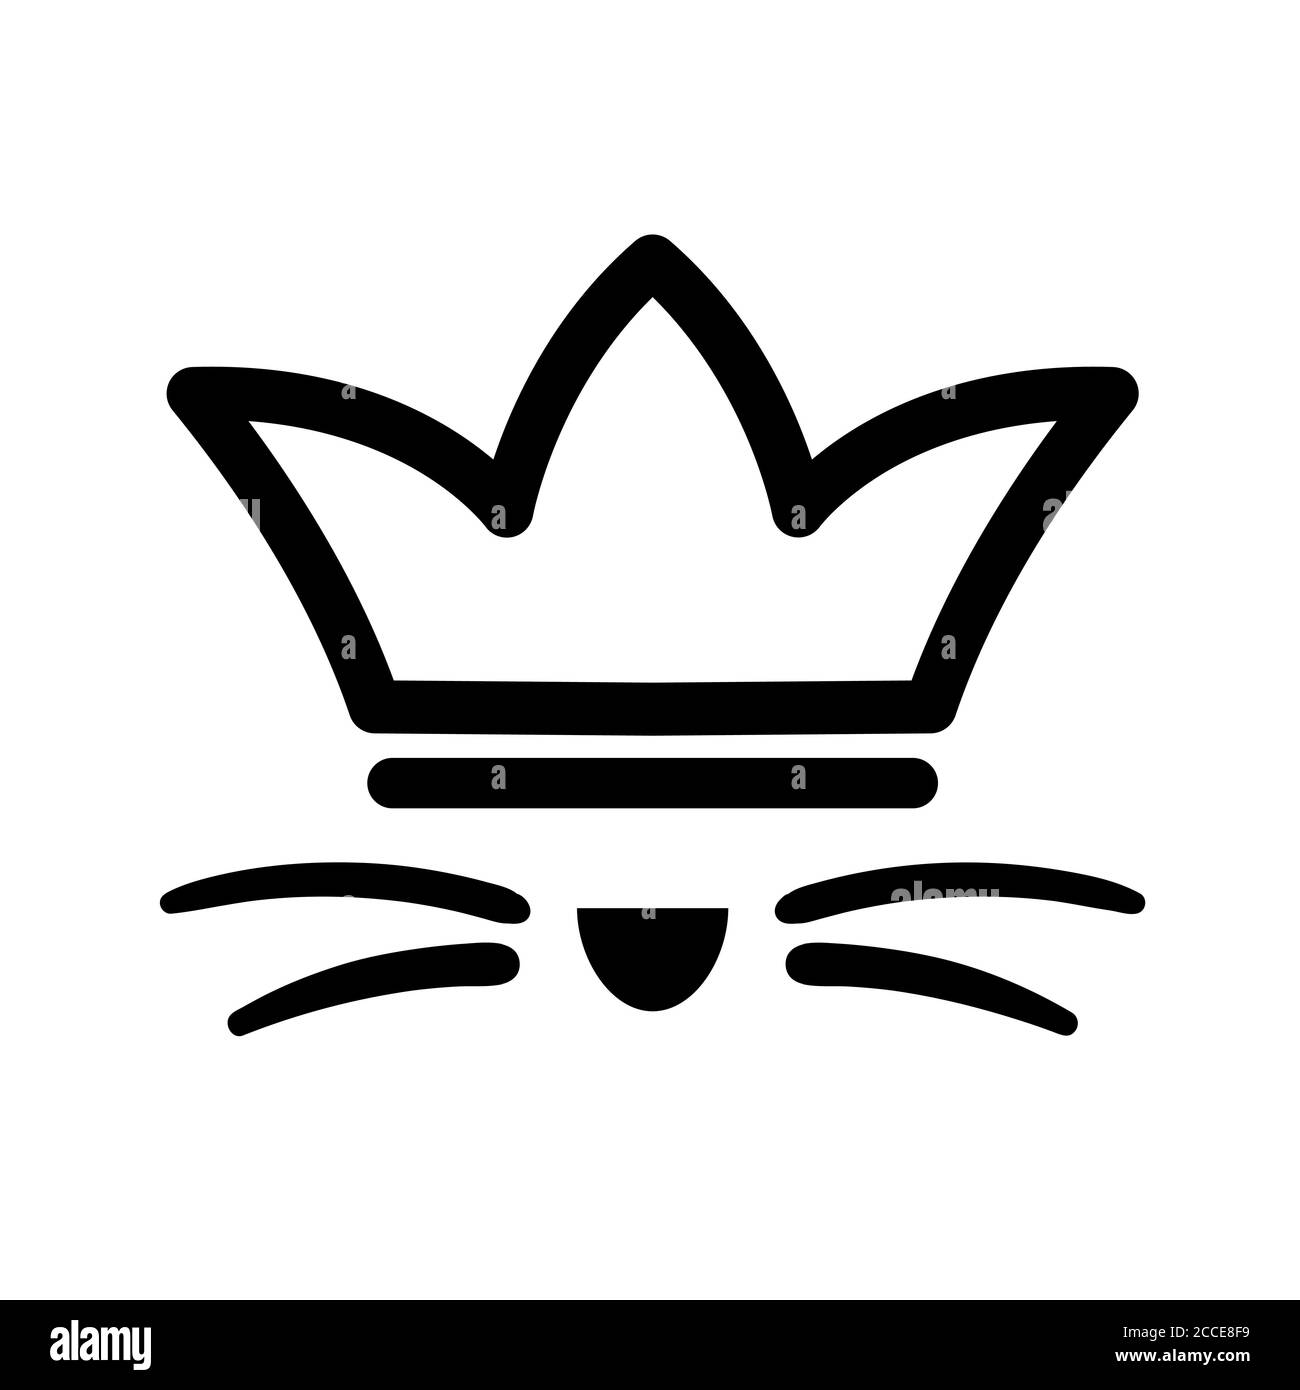 Pet with whisker in crown logo. Royal cat black sign on white background. Cute kitty happy in luxury style. Line drawing animal head king. Kingdom animals icon element vector. Stock Vector